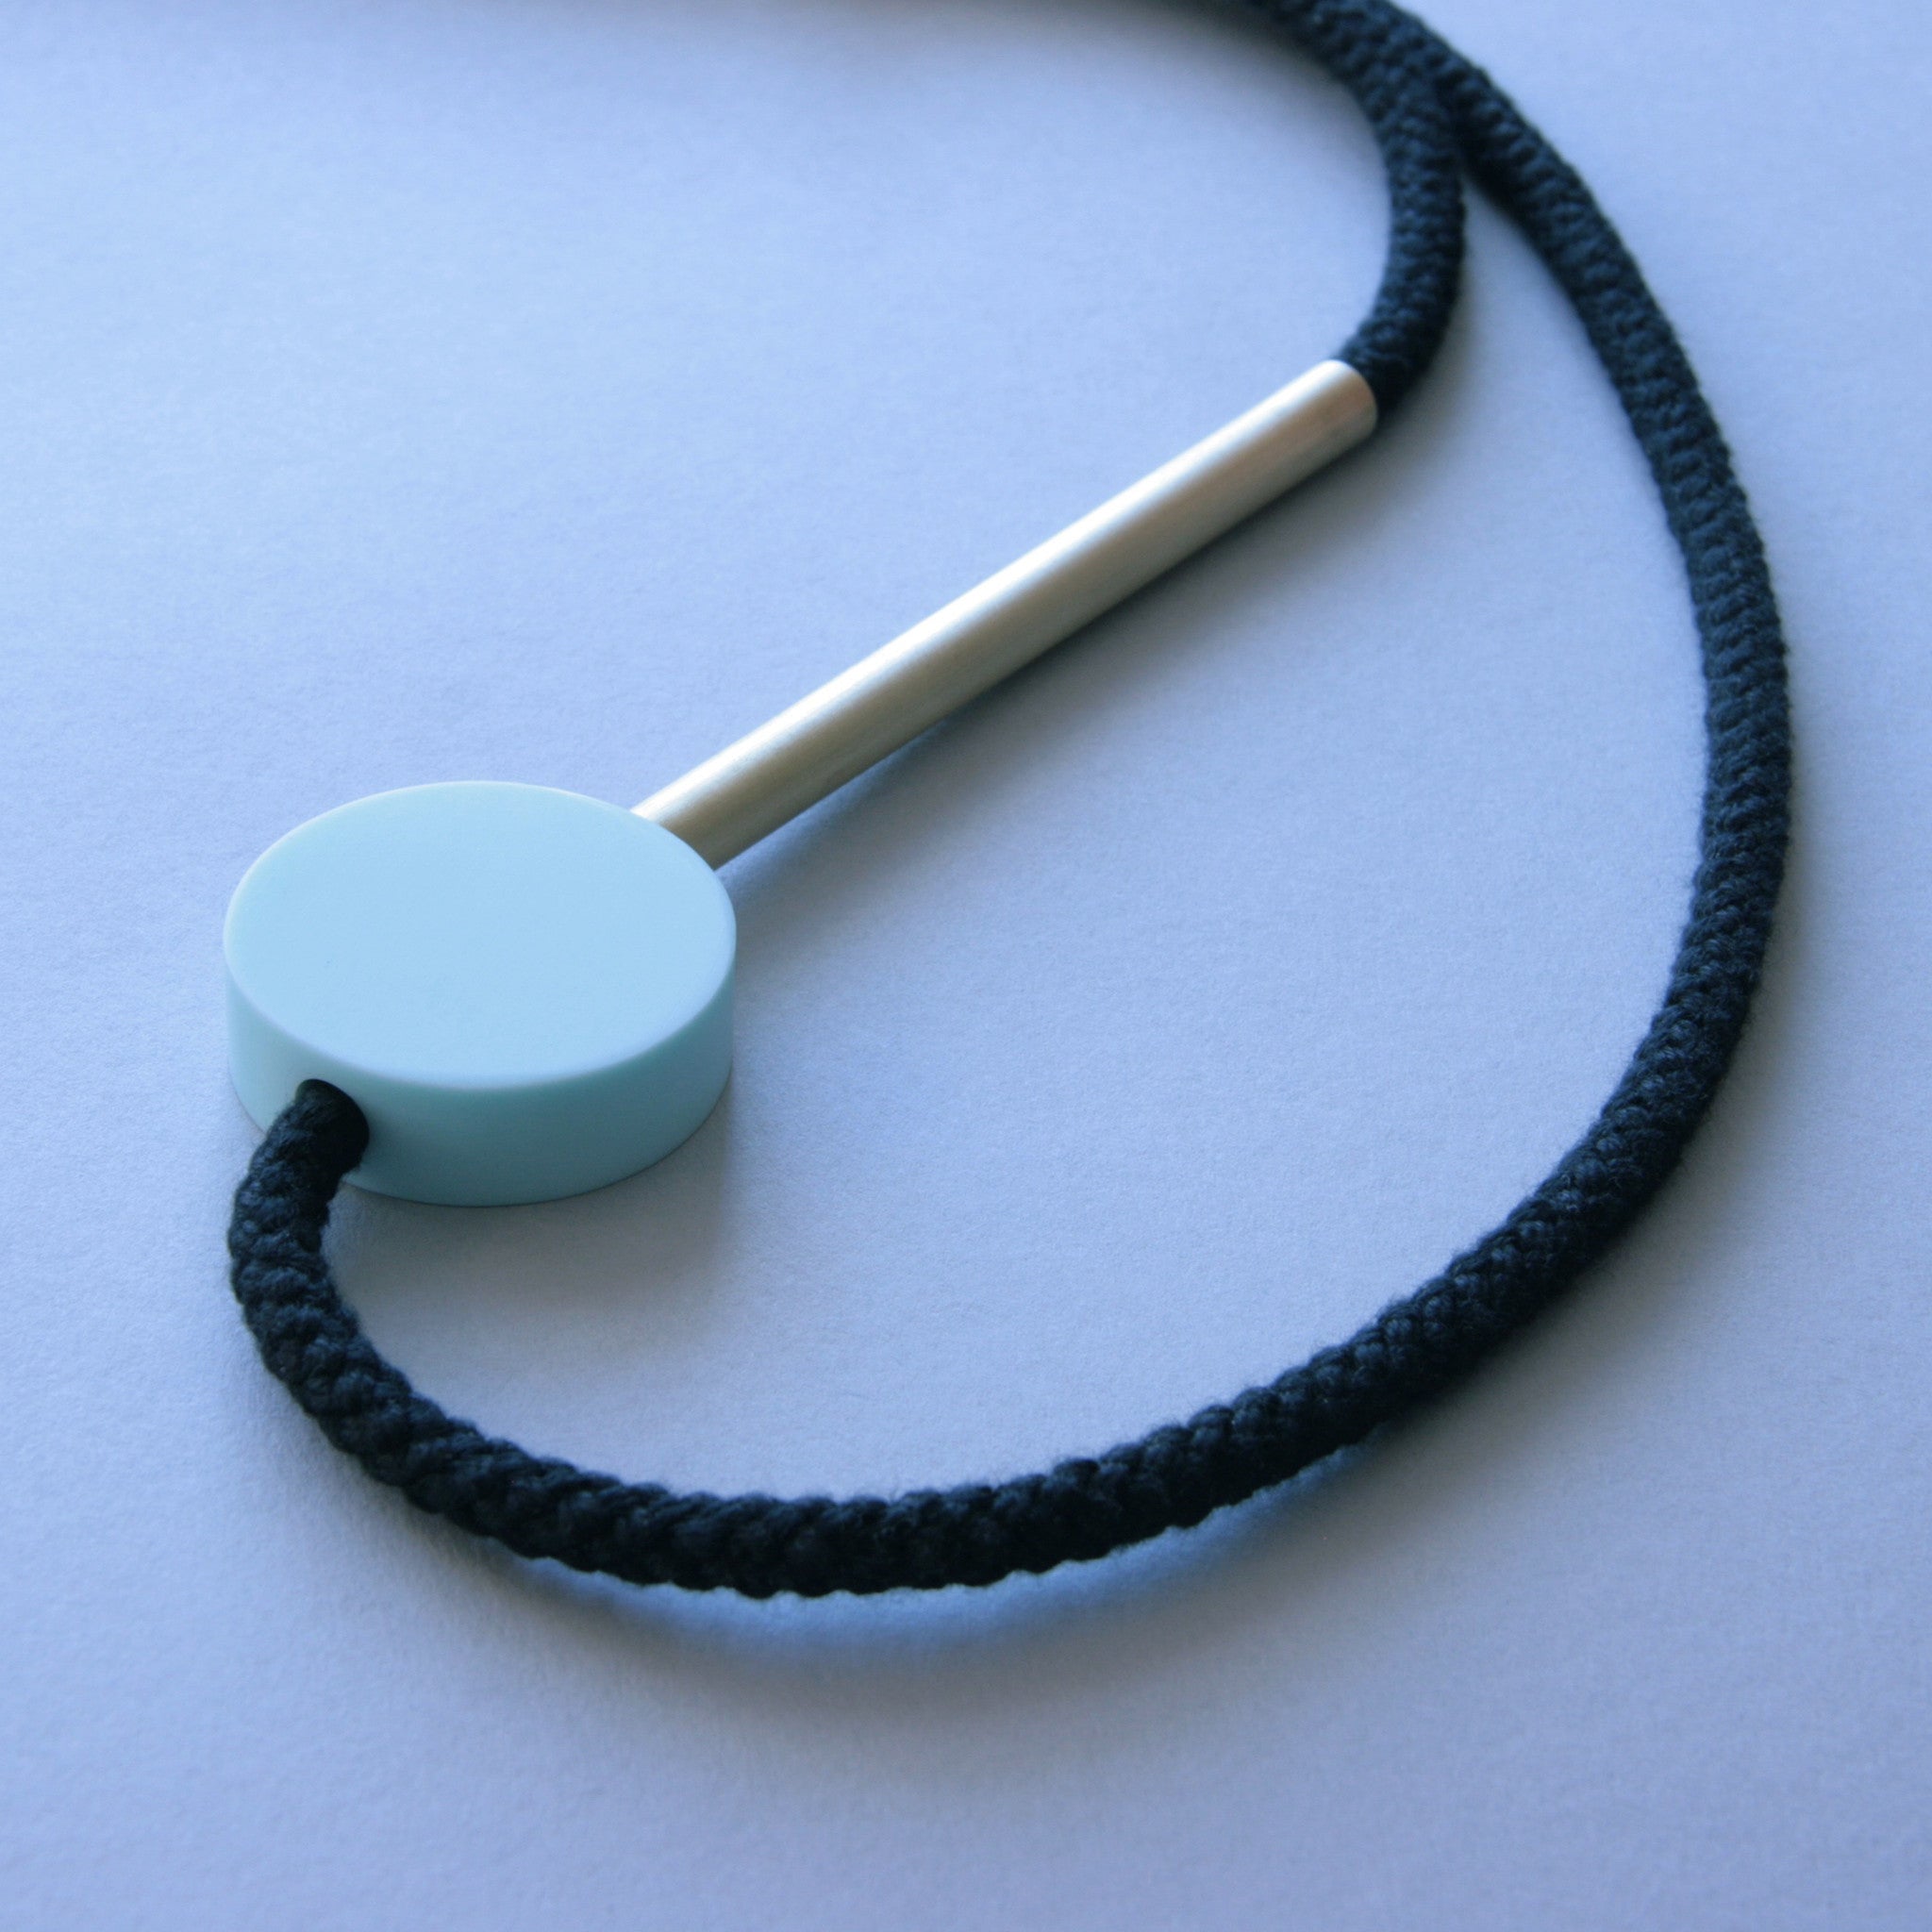 The Gia necklace is a pared down and striking design. Composed of a perfect mint resin circle and a 10cm brass tube. Cord length is fully adjustable using the little wooden ball at the back of the neck. This necklace can work both on a casual outfit or in a smarter look too. Handmade in our London studio. 